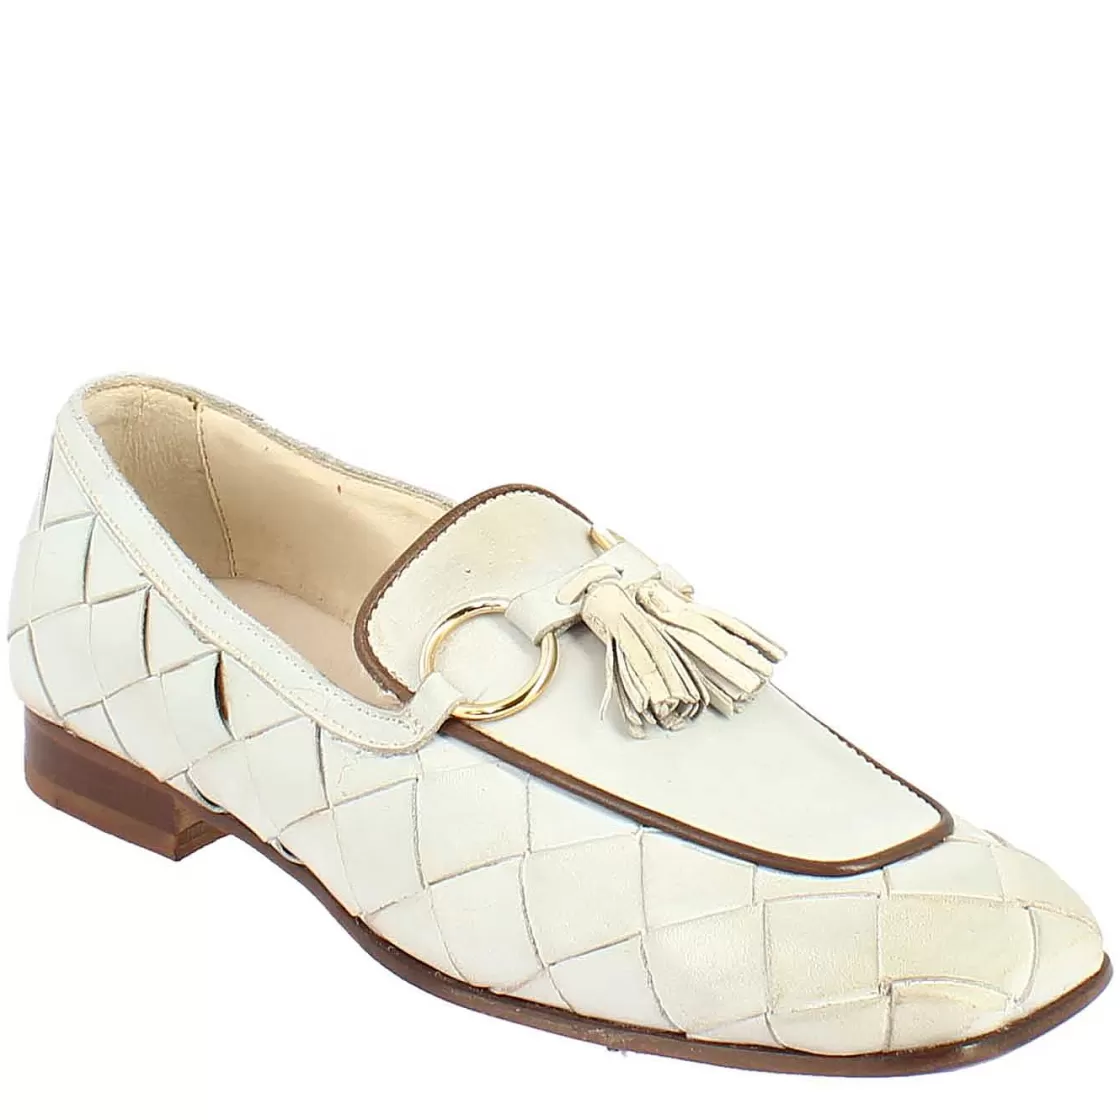 Leonardo Women'S Loafer In White Woven Leather With Buckle And Tassels Cheap